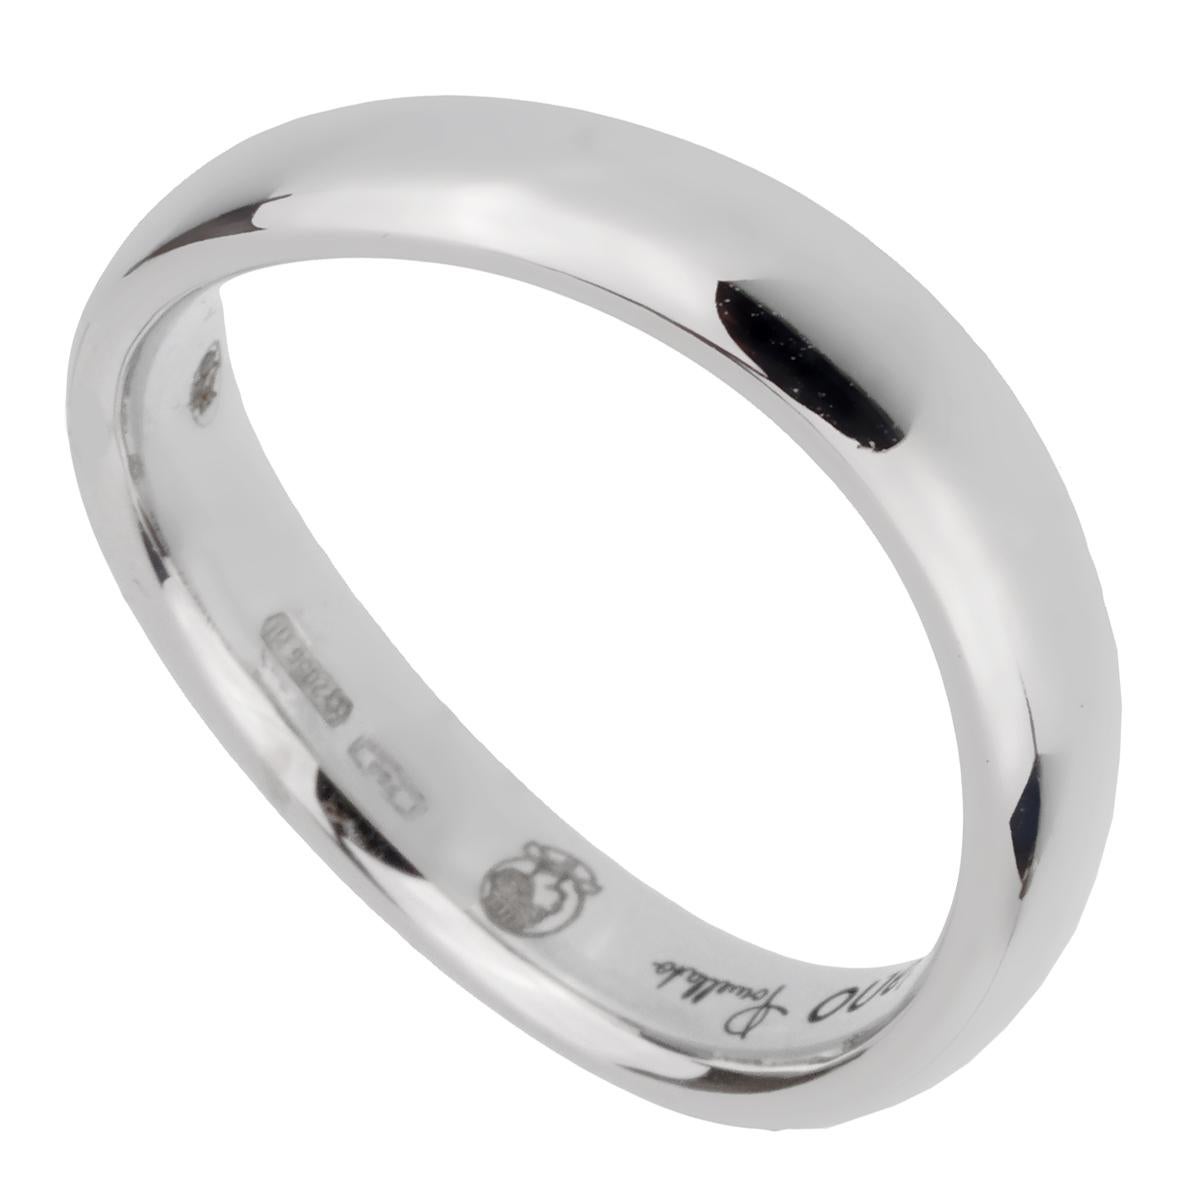 A chic Pomellato wave style band crafted in 18k white gold, the ring measures a size 5.25 and can be resized.

Pomellato Retail Price: $1350
Sku: 2406